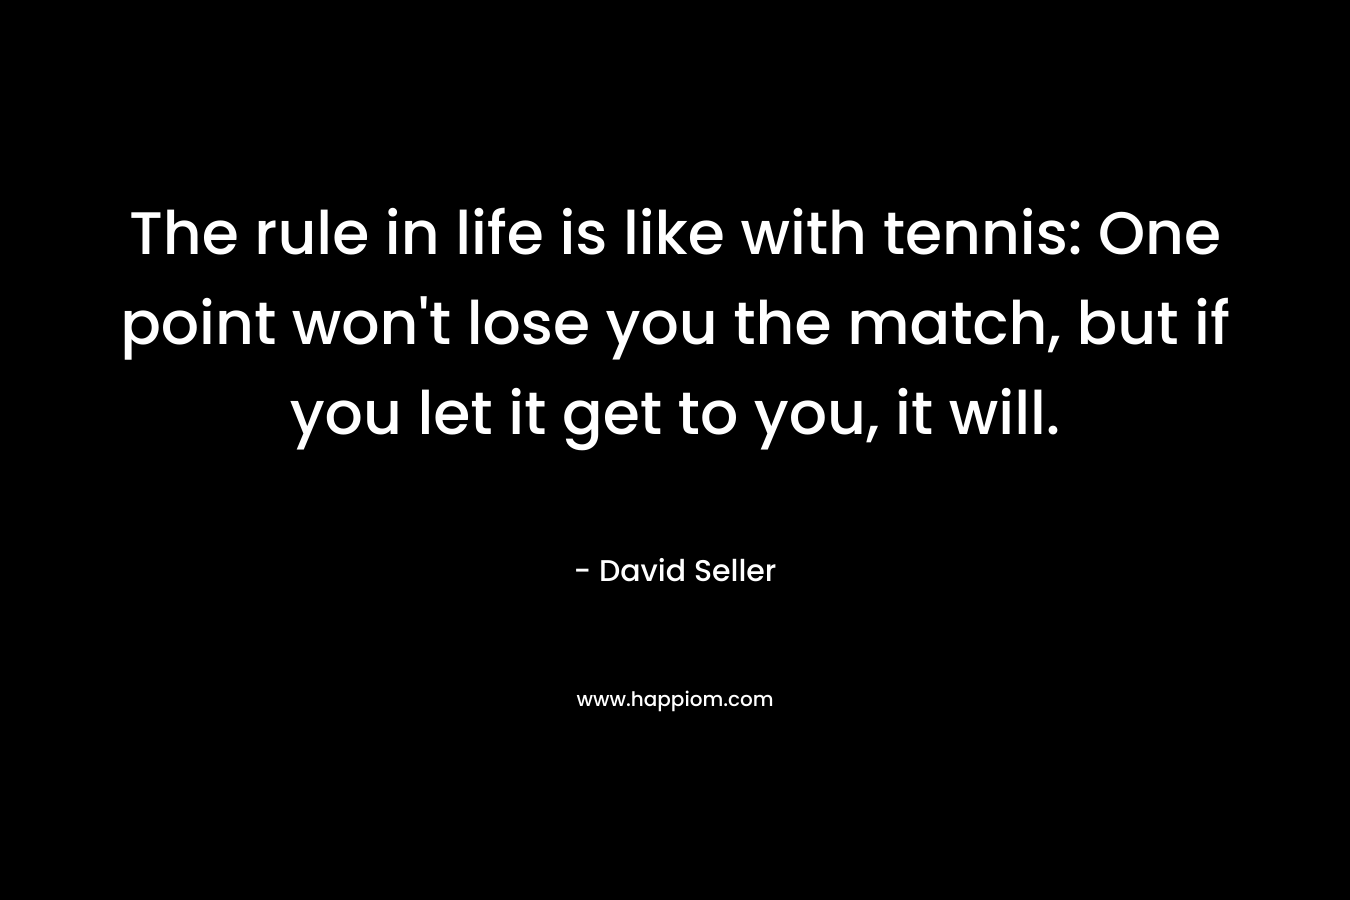 The rule in life is like with tennis: One point won't lose you the match, but if you let it get to you, it will.